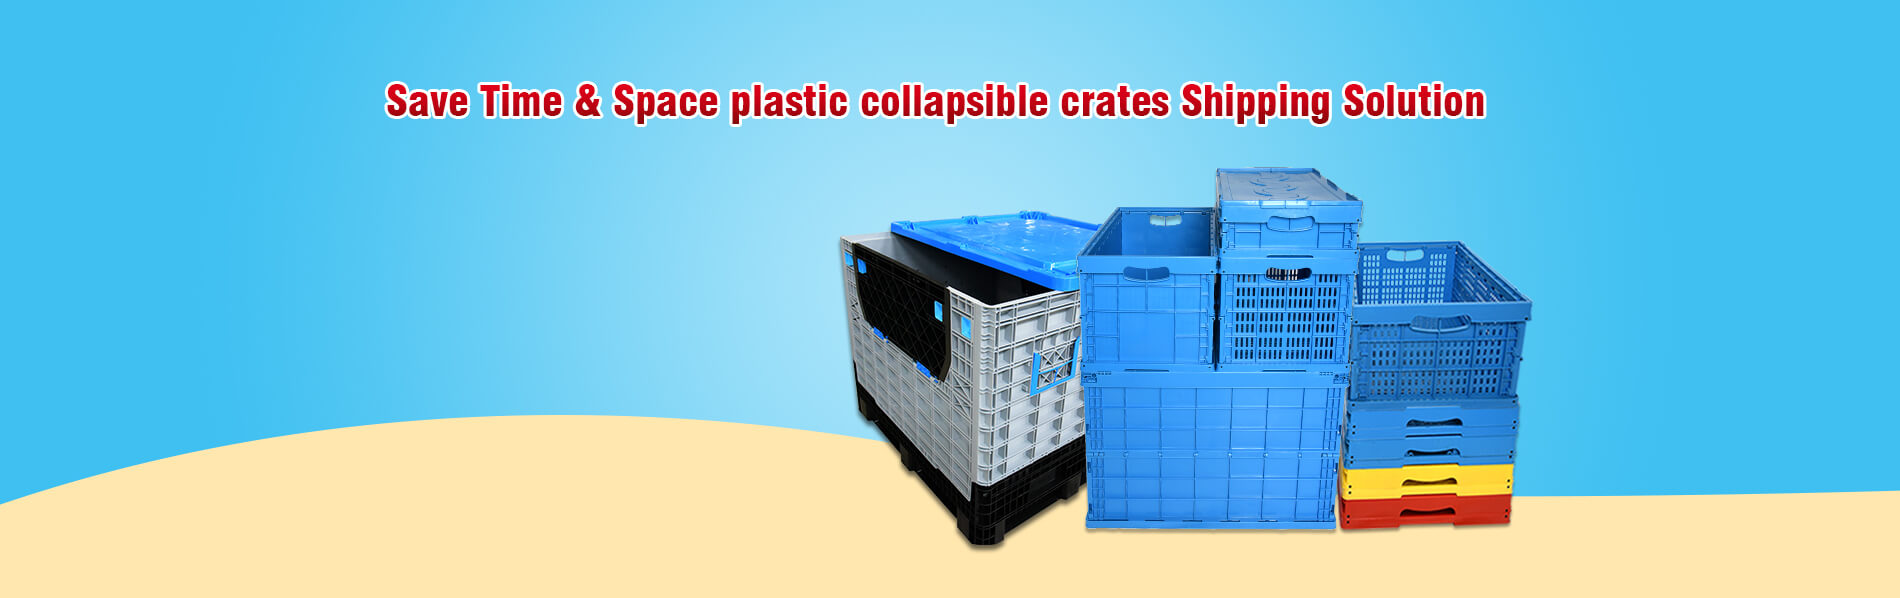 Logistic Collapsible Crates Solution - SHG